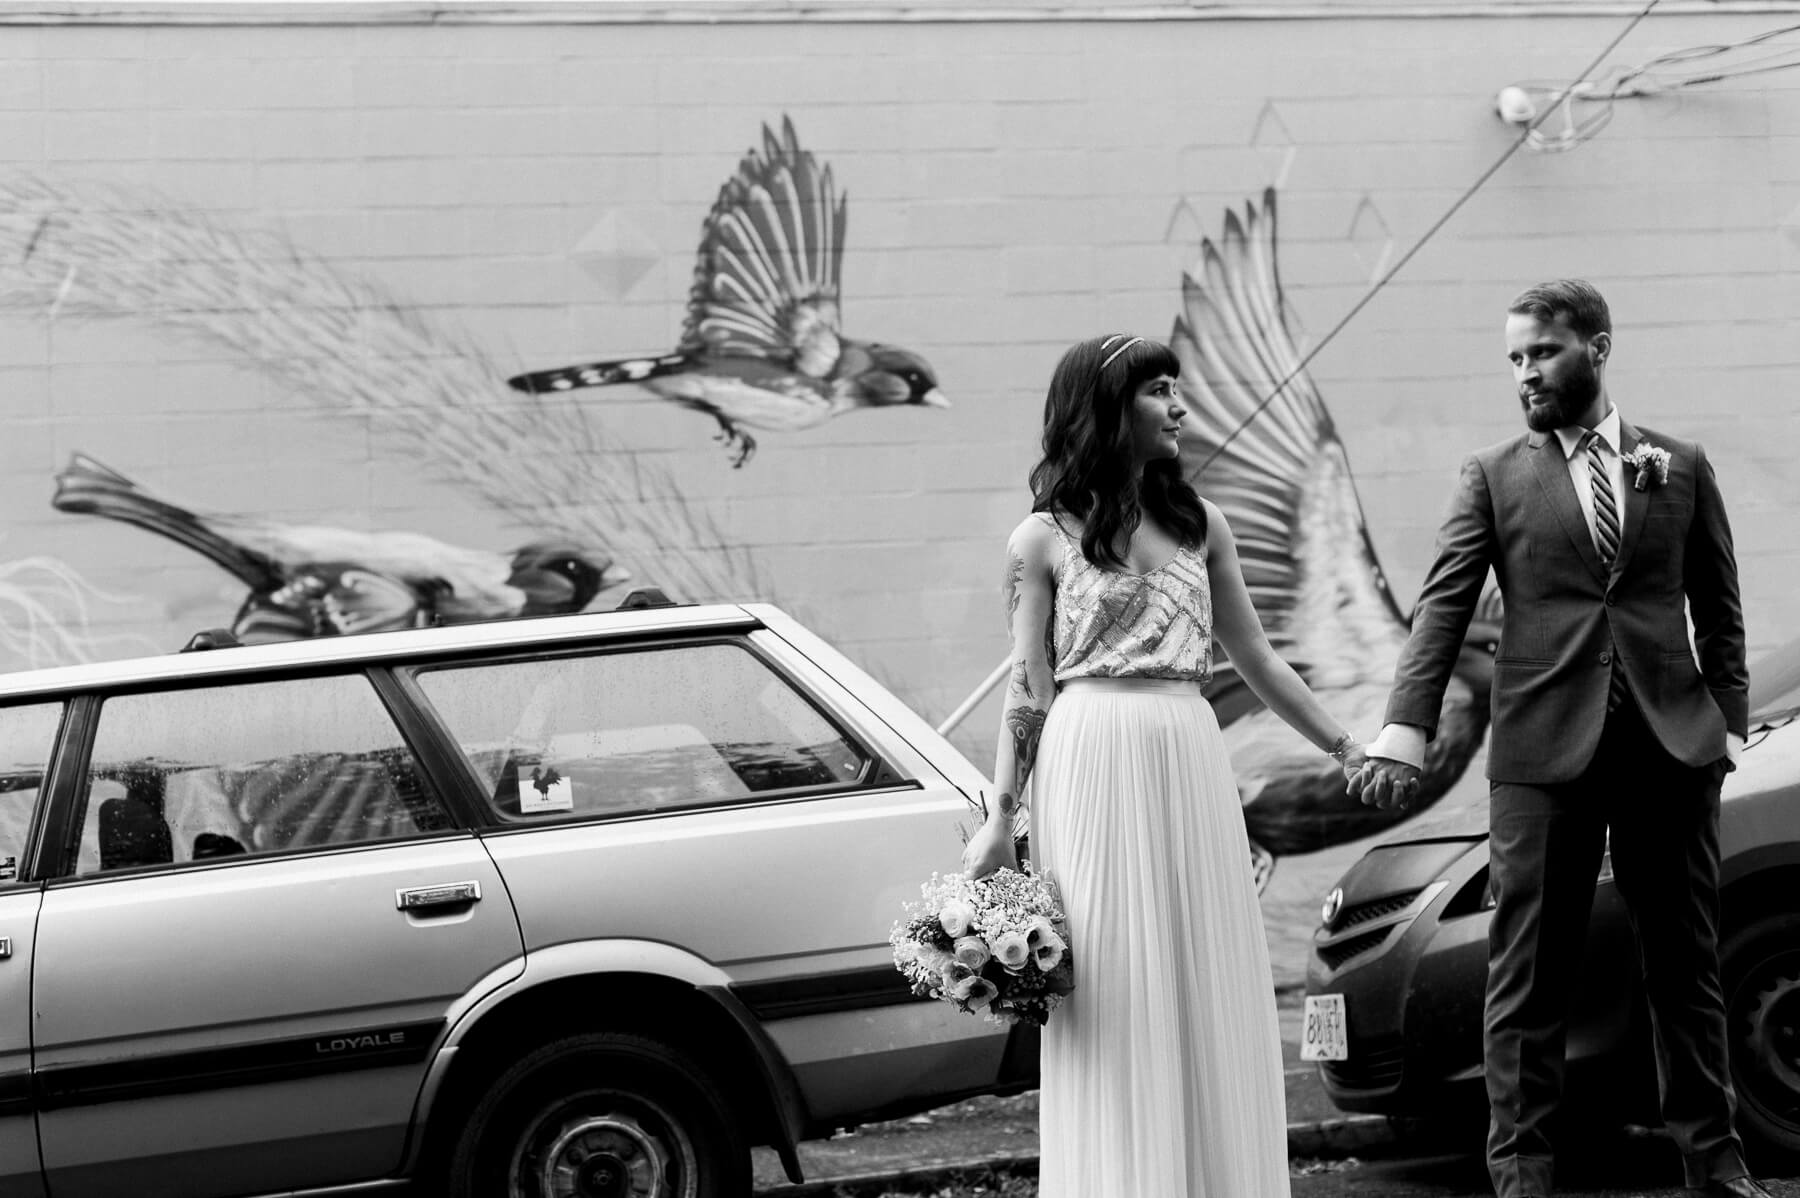 Portland, Oregon bride and groom pose in front of local cars and a bird mural in SE Portland. By Portland Holocene Photographer Briana Morrison